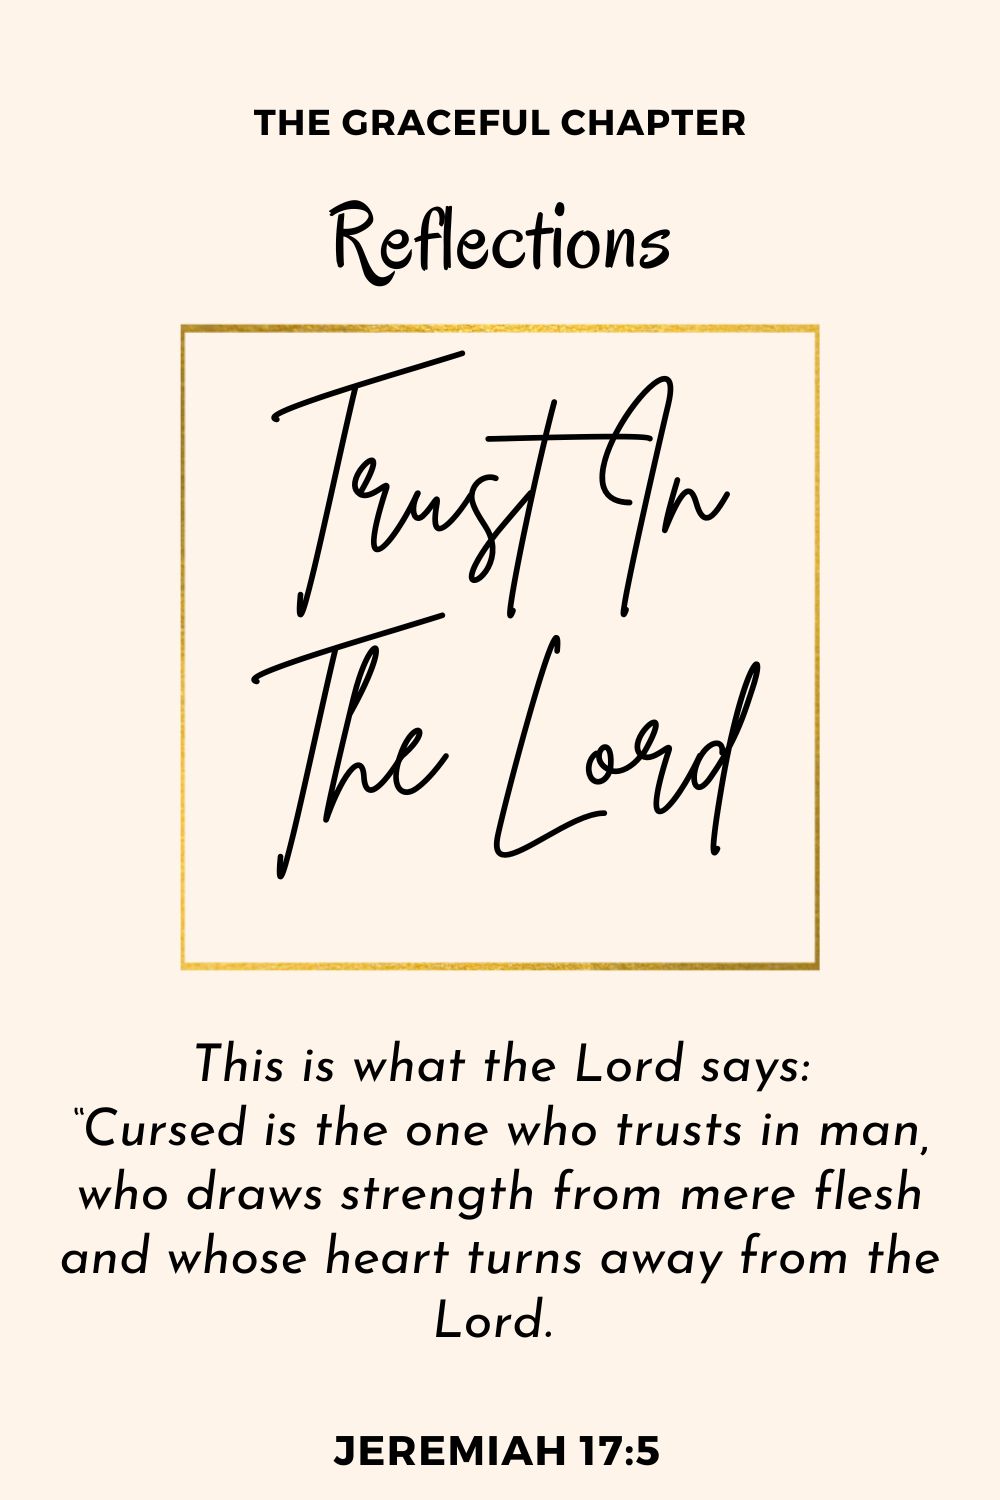 Reflection - Jeremiah 17:5-8 - Trust In The Lord